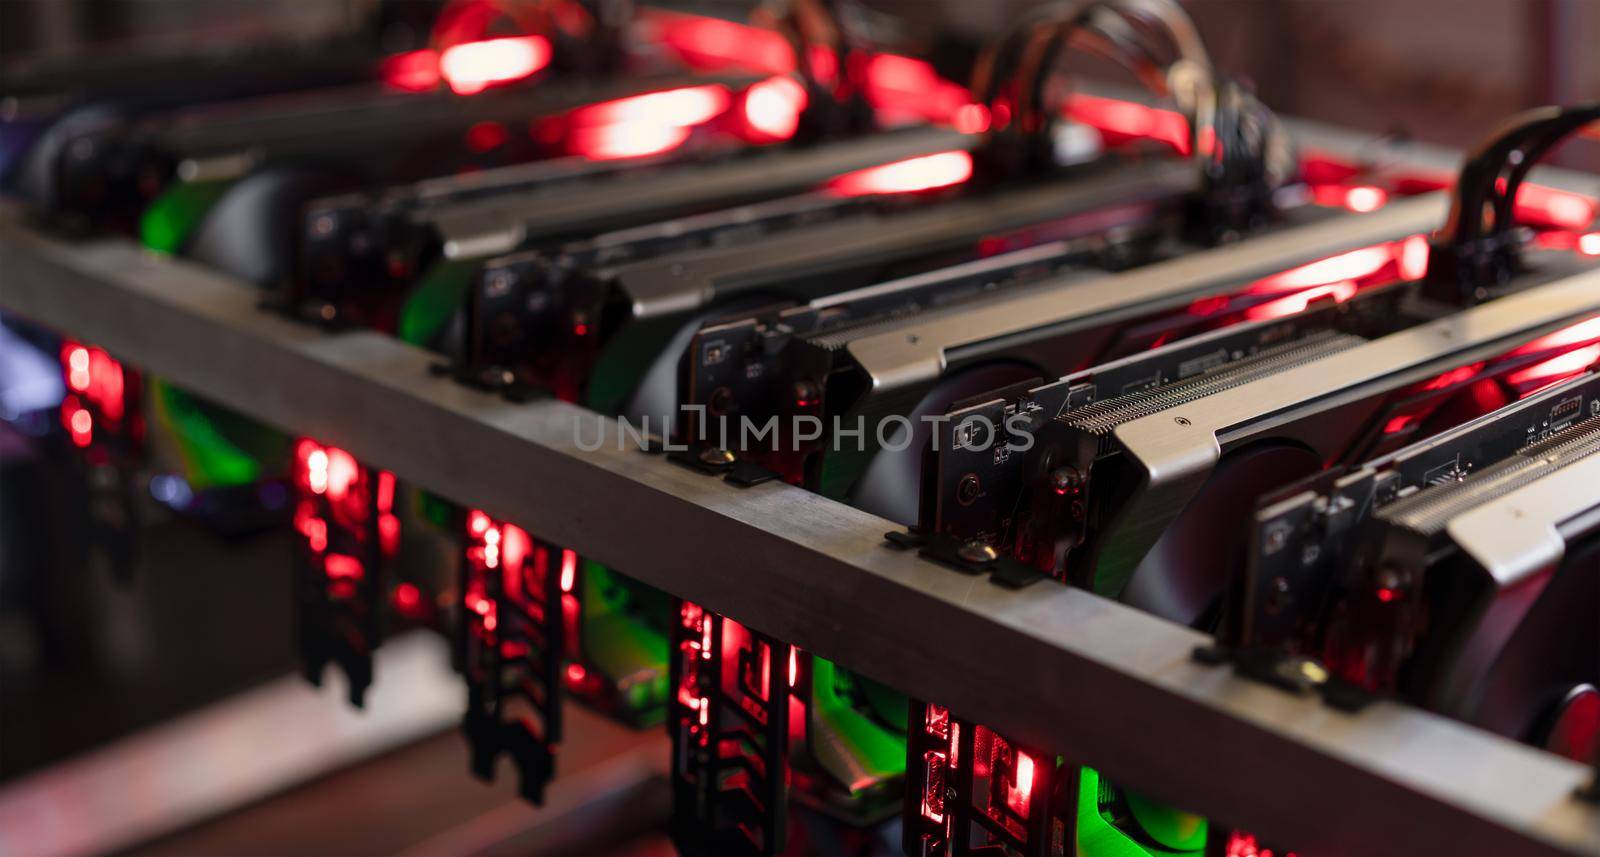 Graphics card for mining for bitcoin mining farm by Buttus_casso